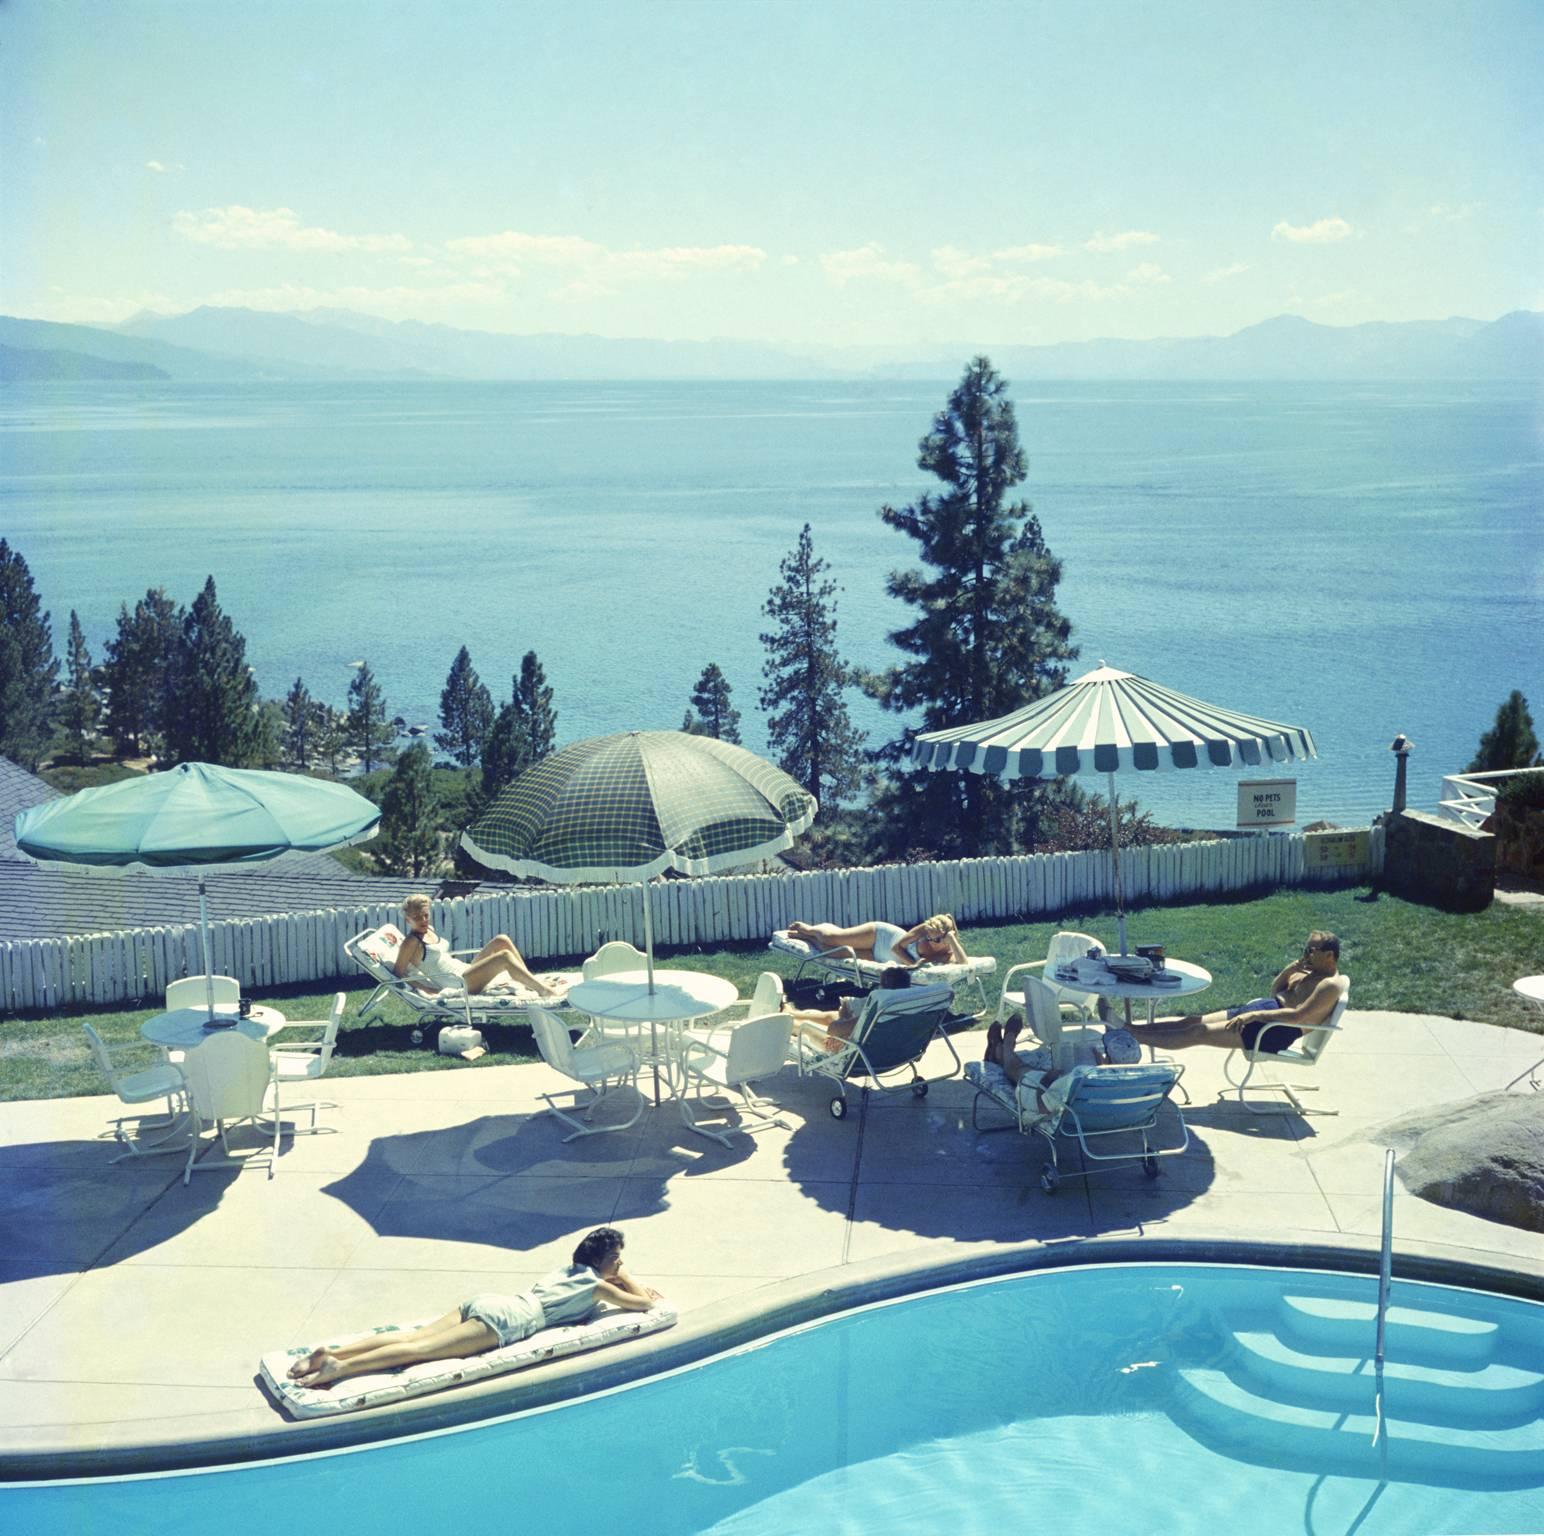 'Relaxing At Lake Tahoe' by Slim Aarons

A group of people relaxing by a pool near Lake Tahoe, California, 1959.

Step into the big Blue with this sumptuous scene of people relaxing on a hot summer's day around the swimming pool, with lilos and